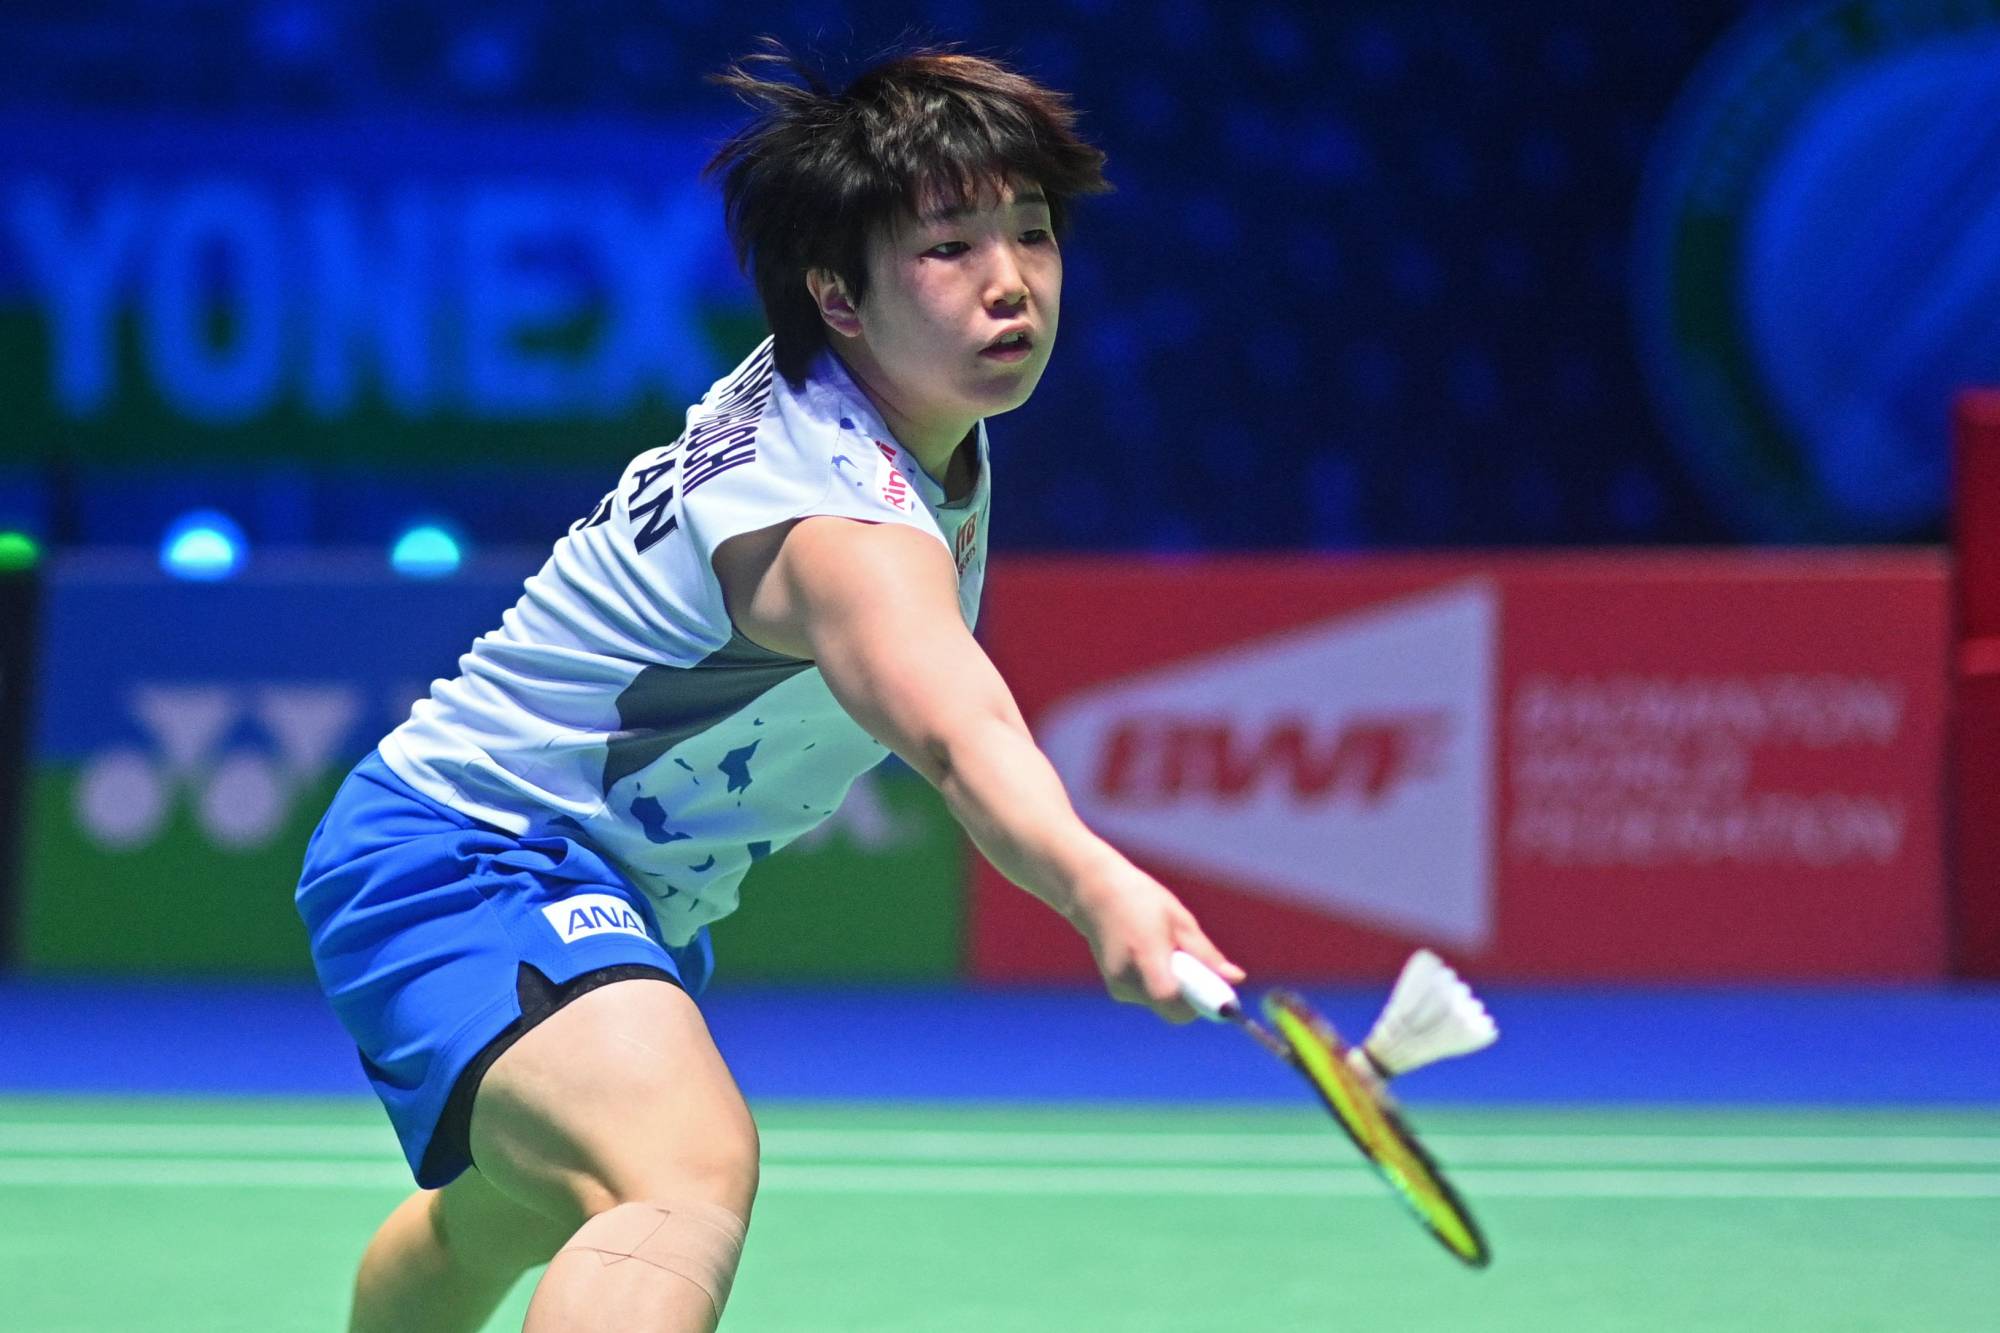 Japanese stars claim three titles at All England Open